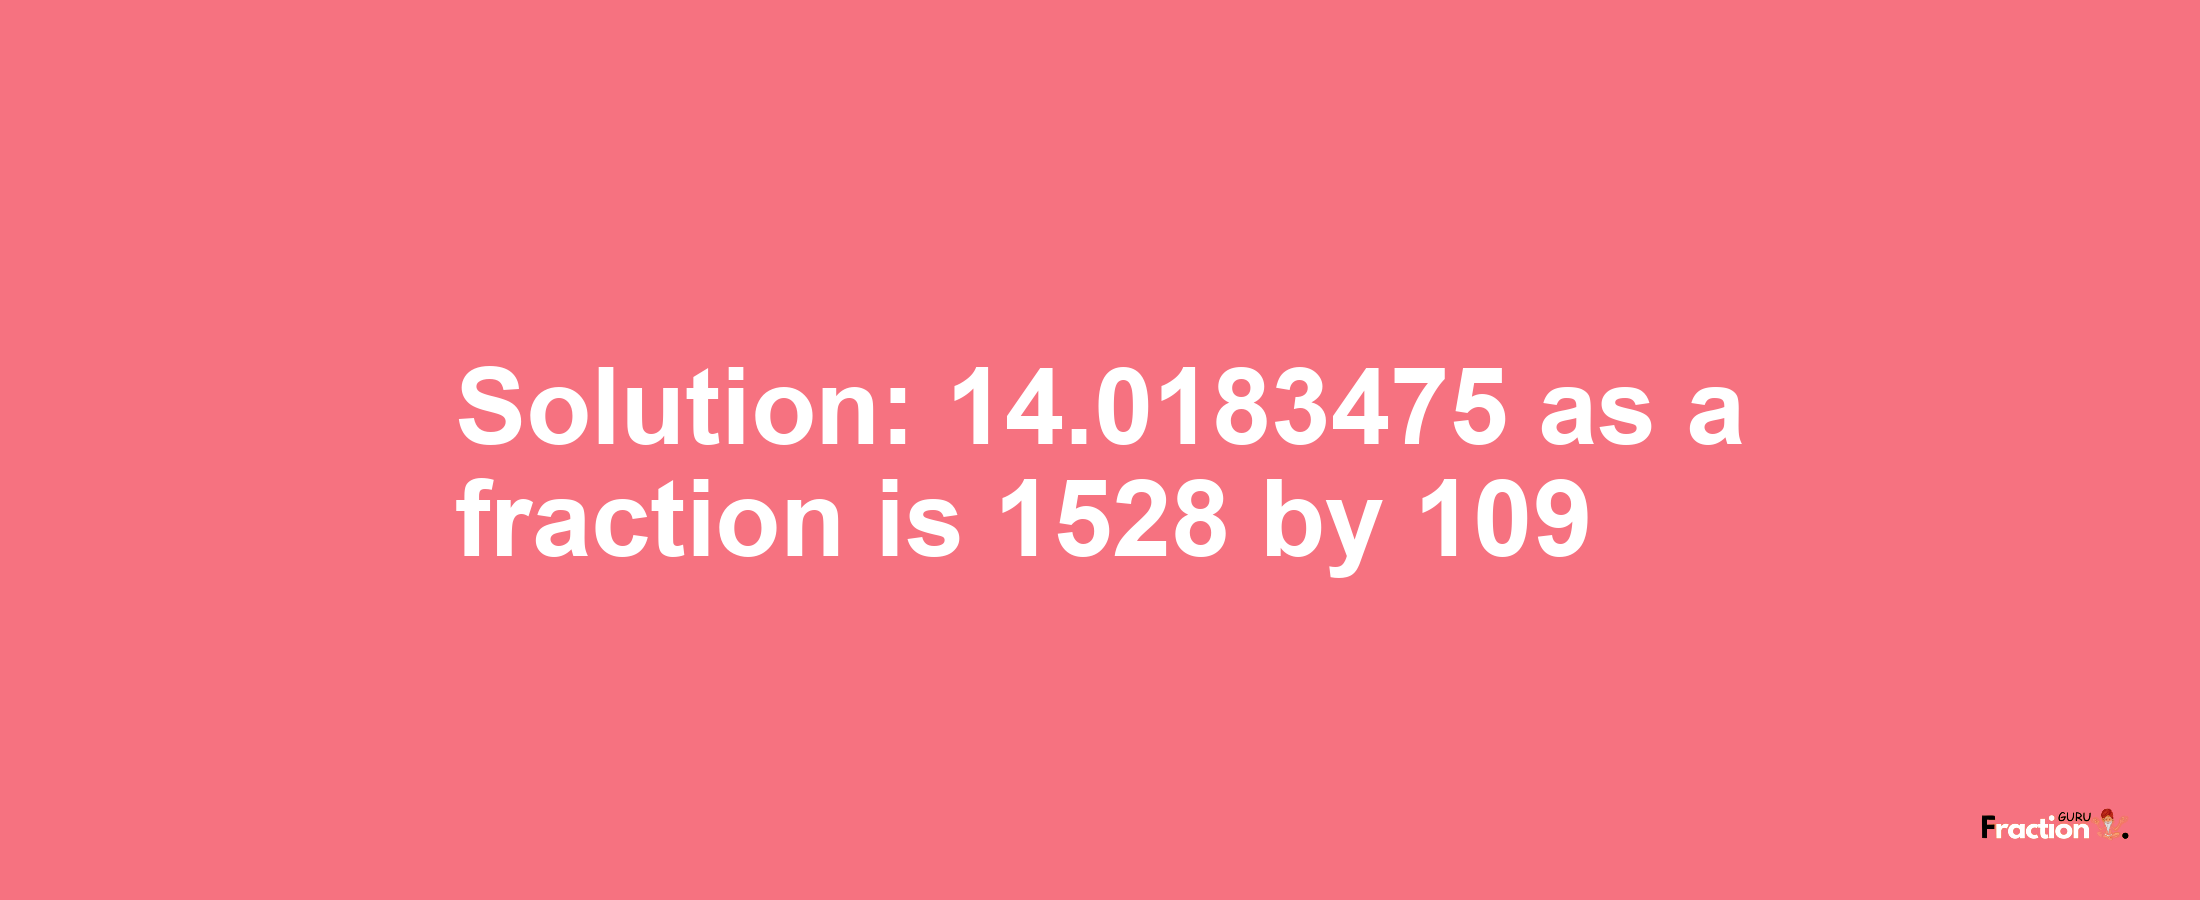 Solution:14.0183475 as a fraction is 1528/109